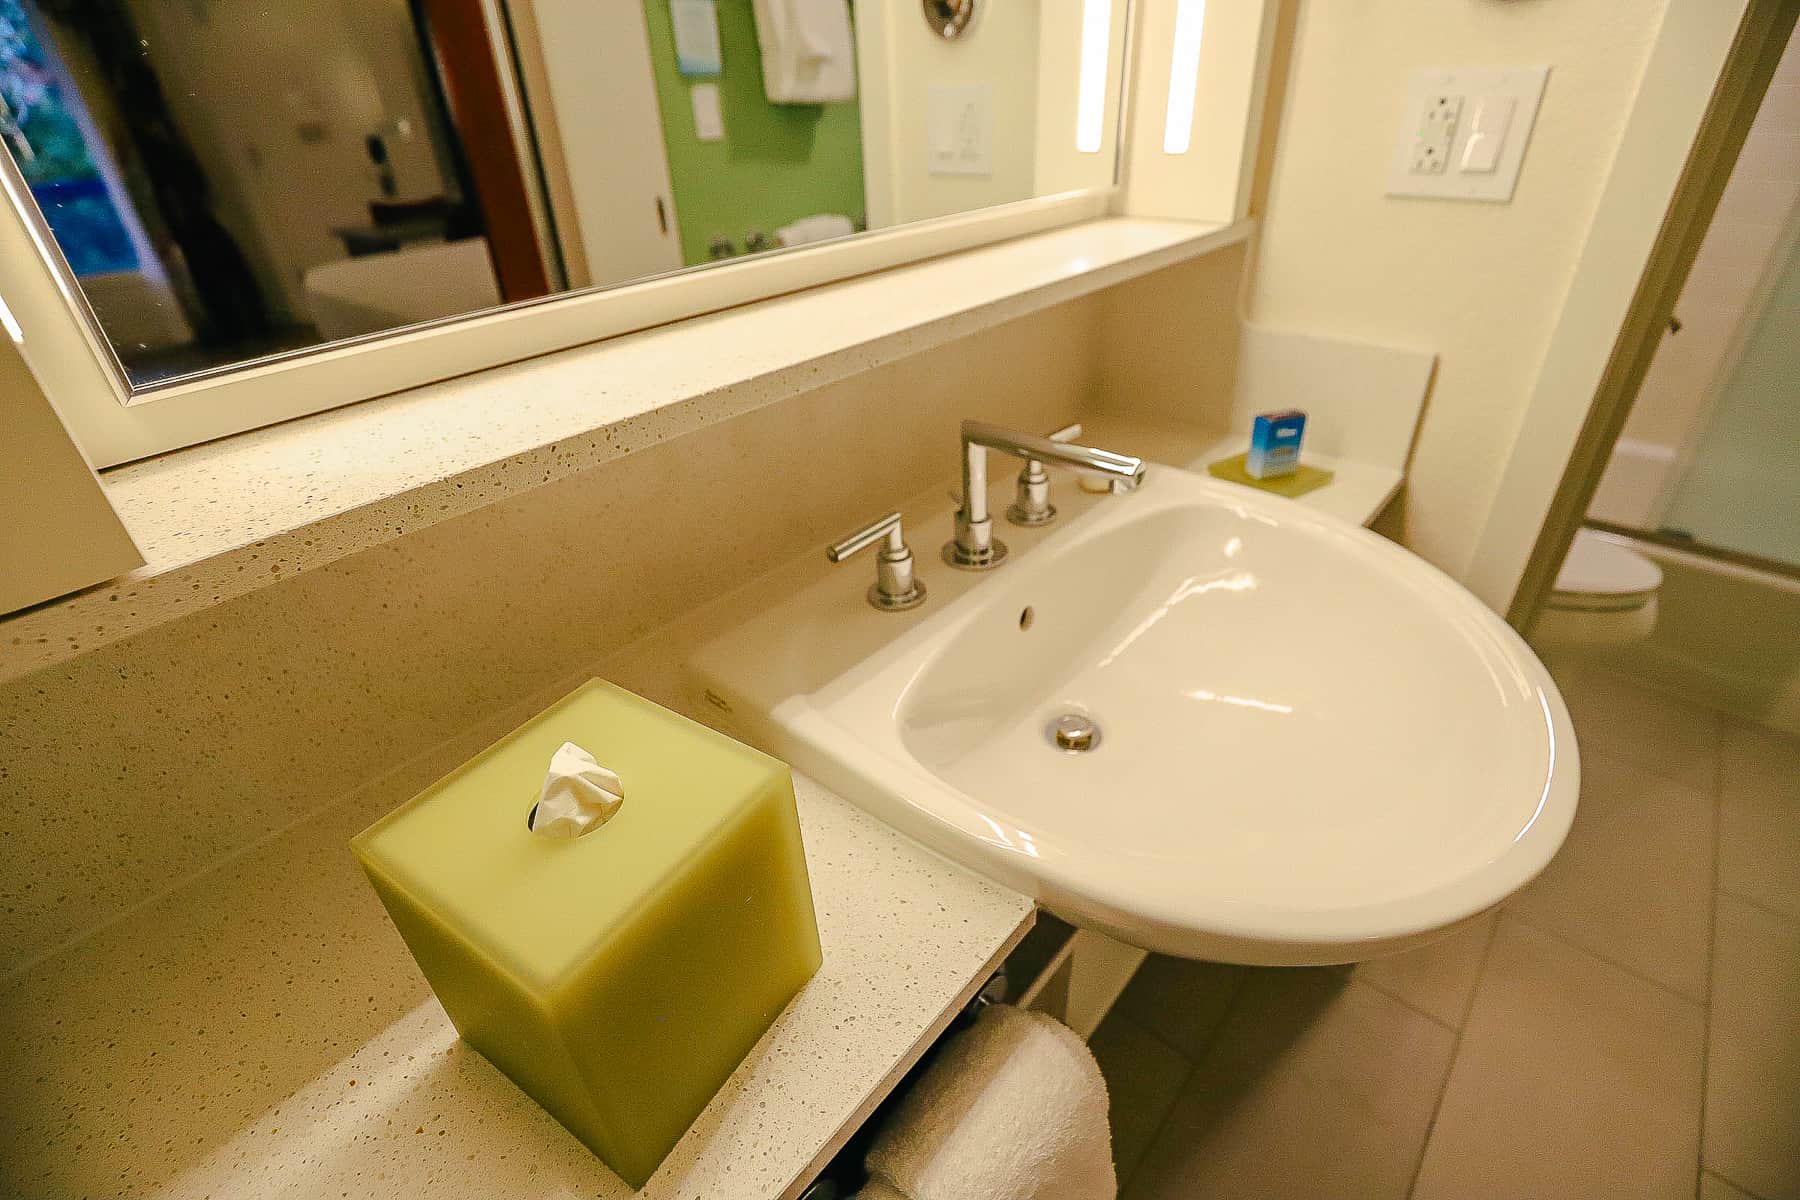 rooms at All-Star Sports have one sink 